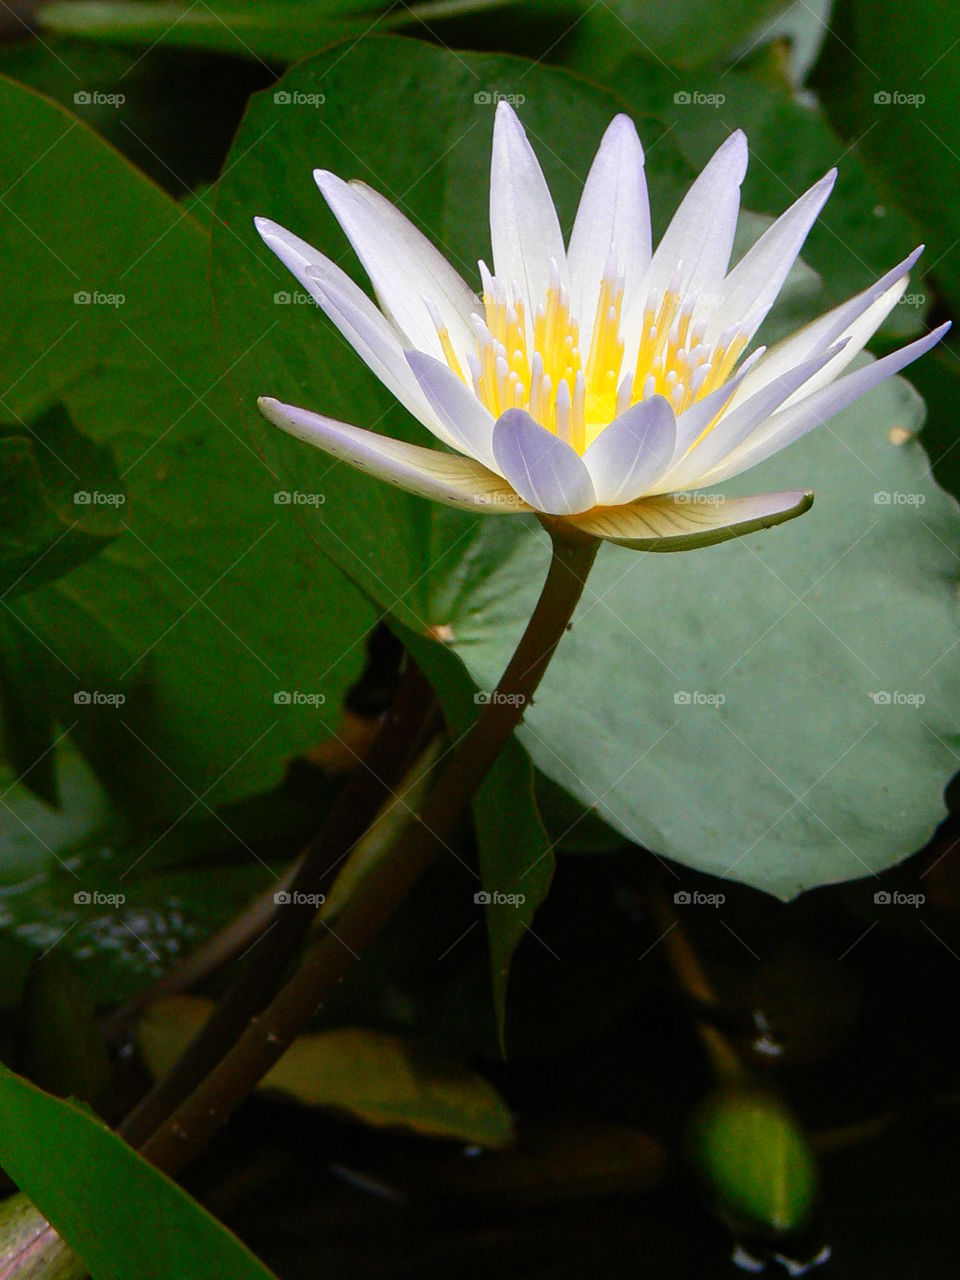 Waterlily emerging from the mud